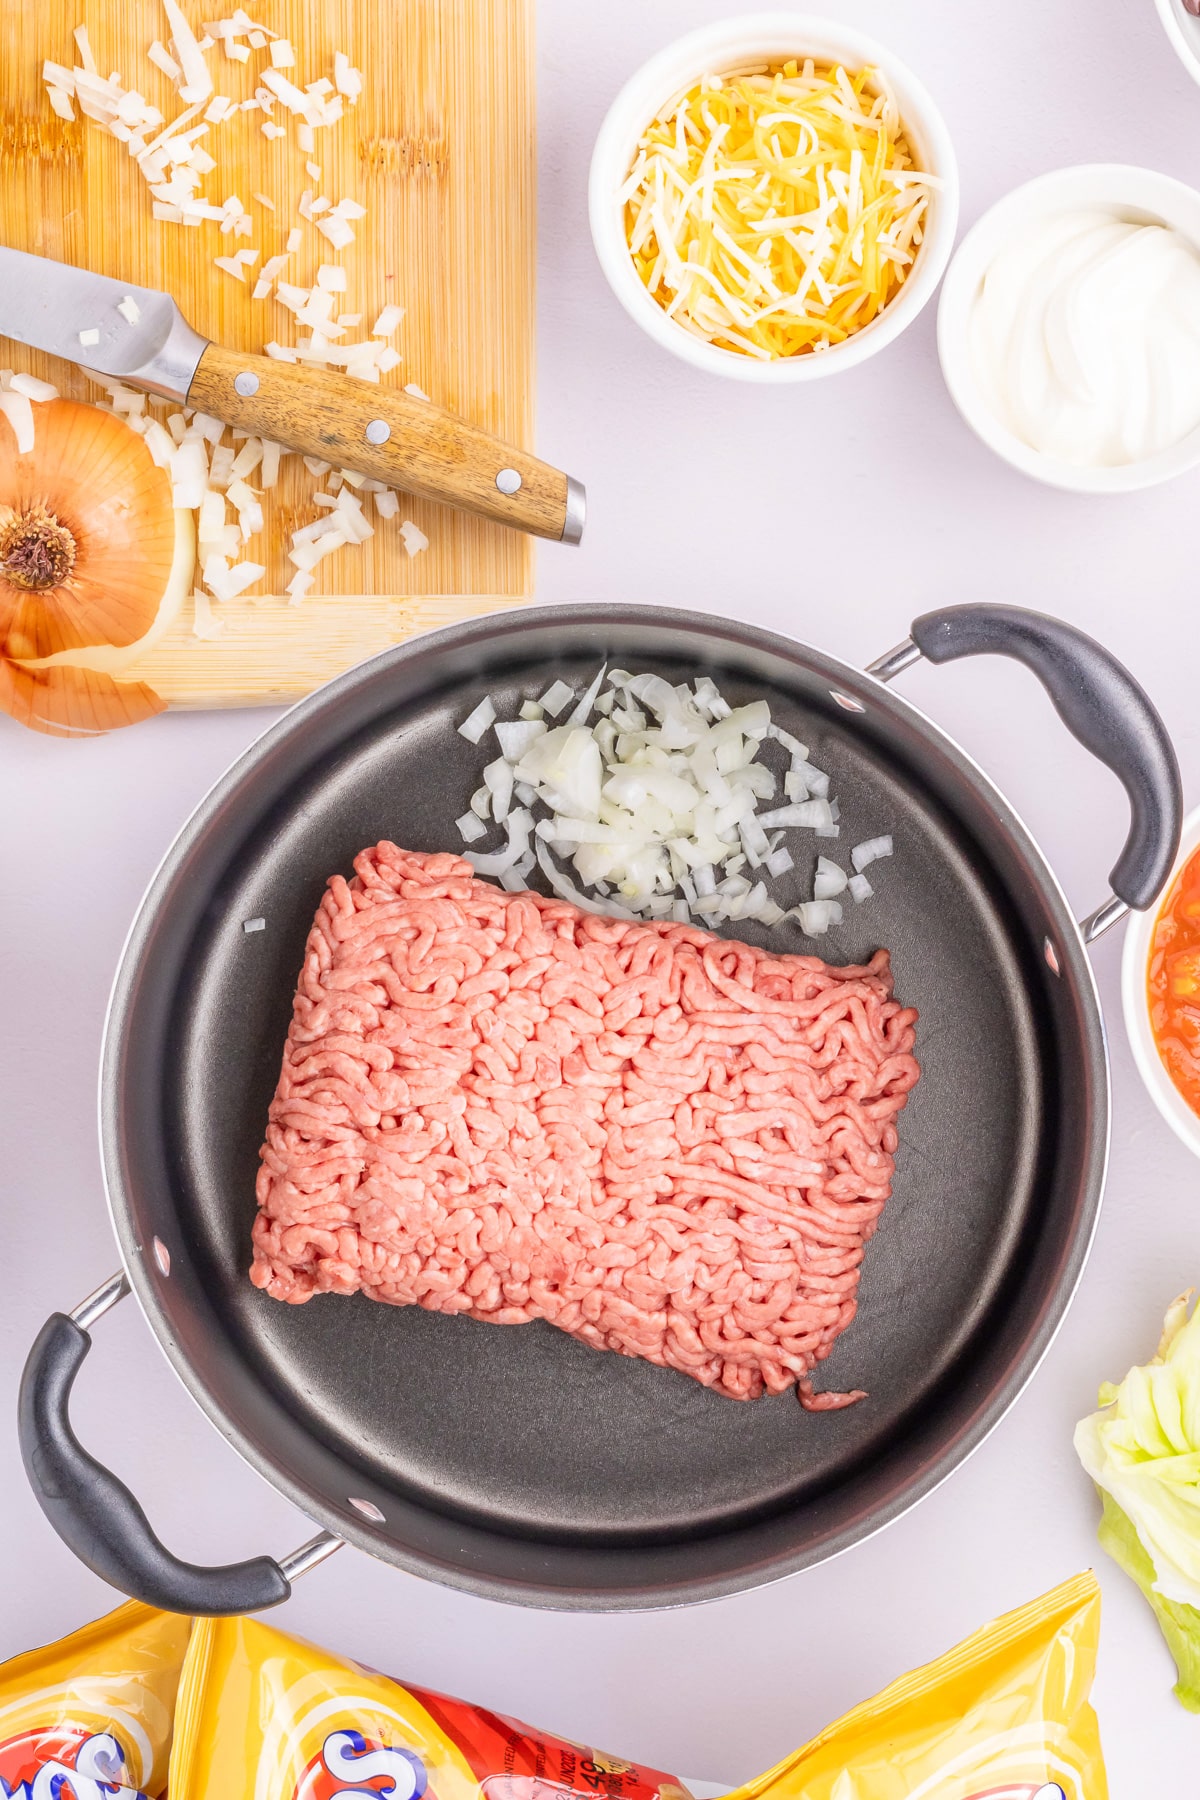 Ground beef and onions in a pan with a cutting board with onions, and bowls of cheese and sour cream nearby on the counter from overhead.